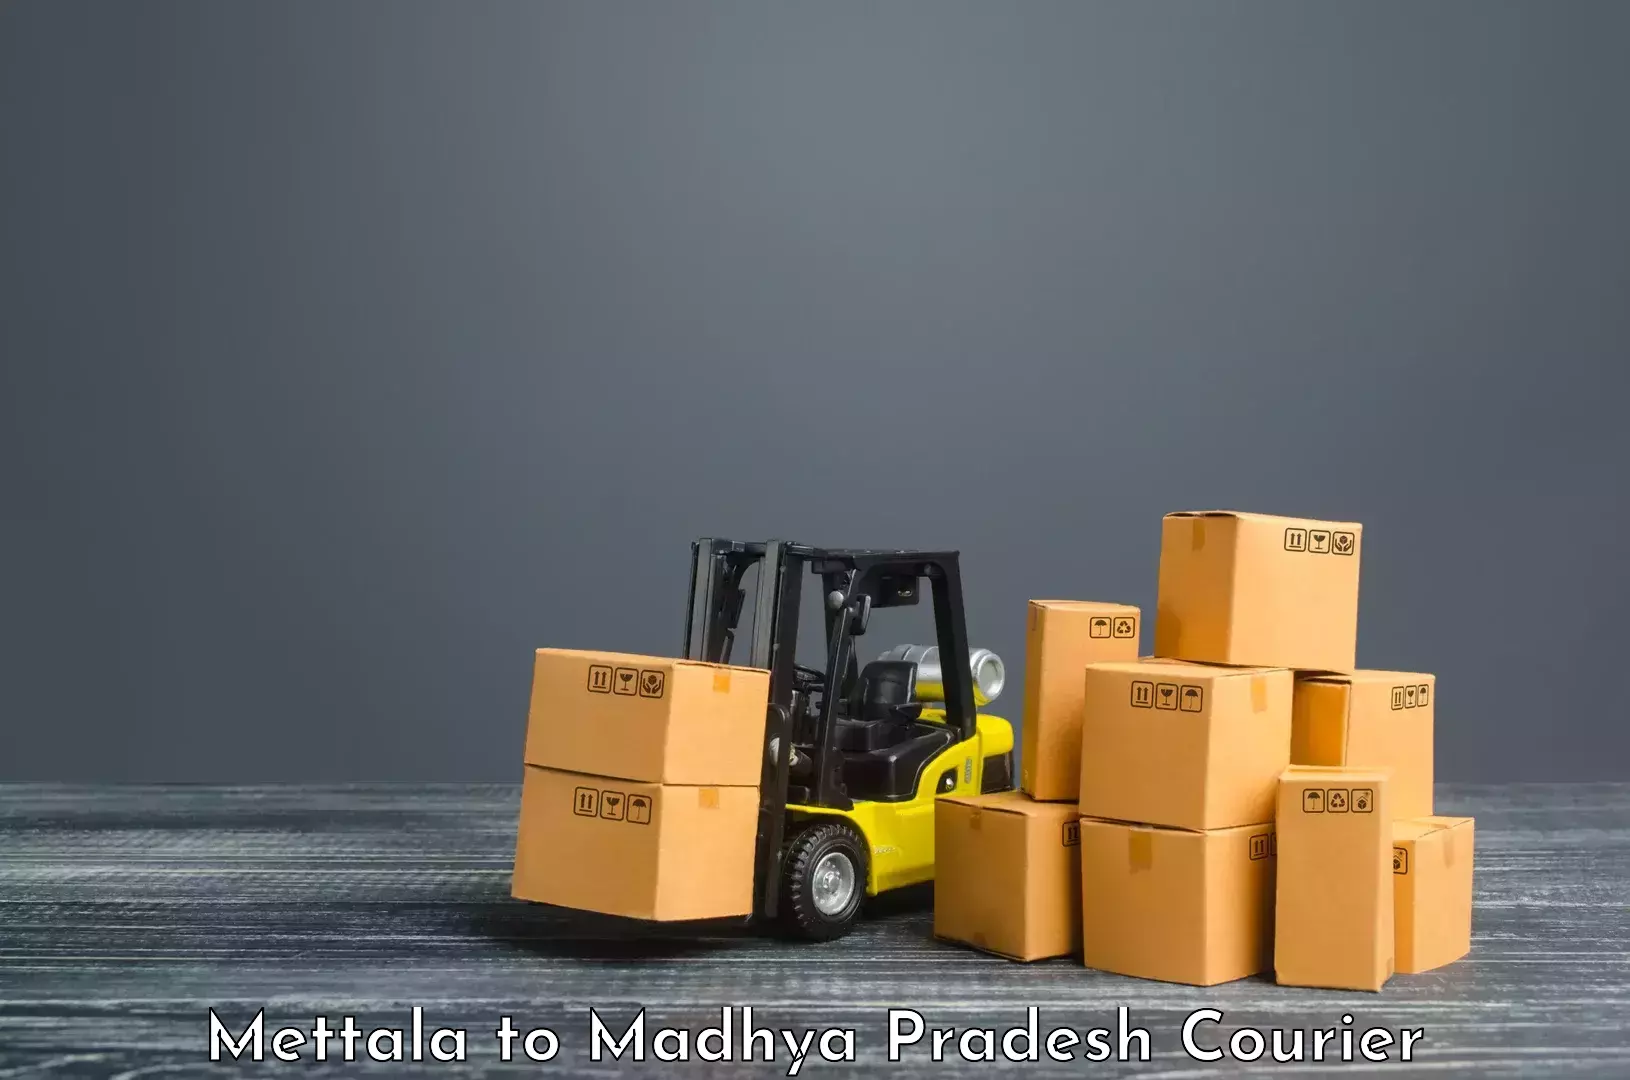 User-friendly delivery service Mettala to Khandwa